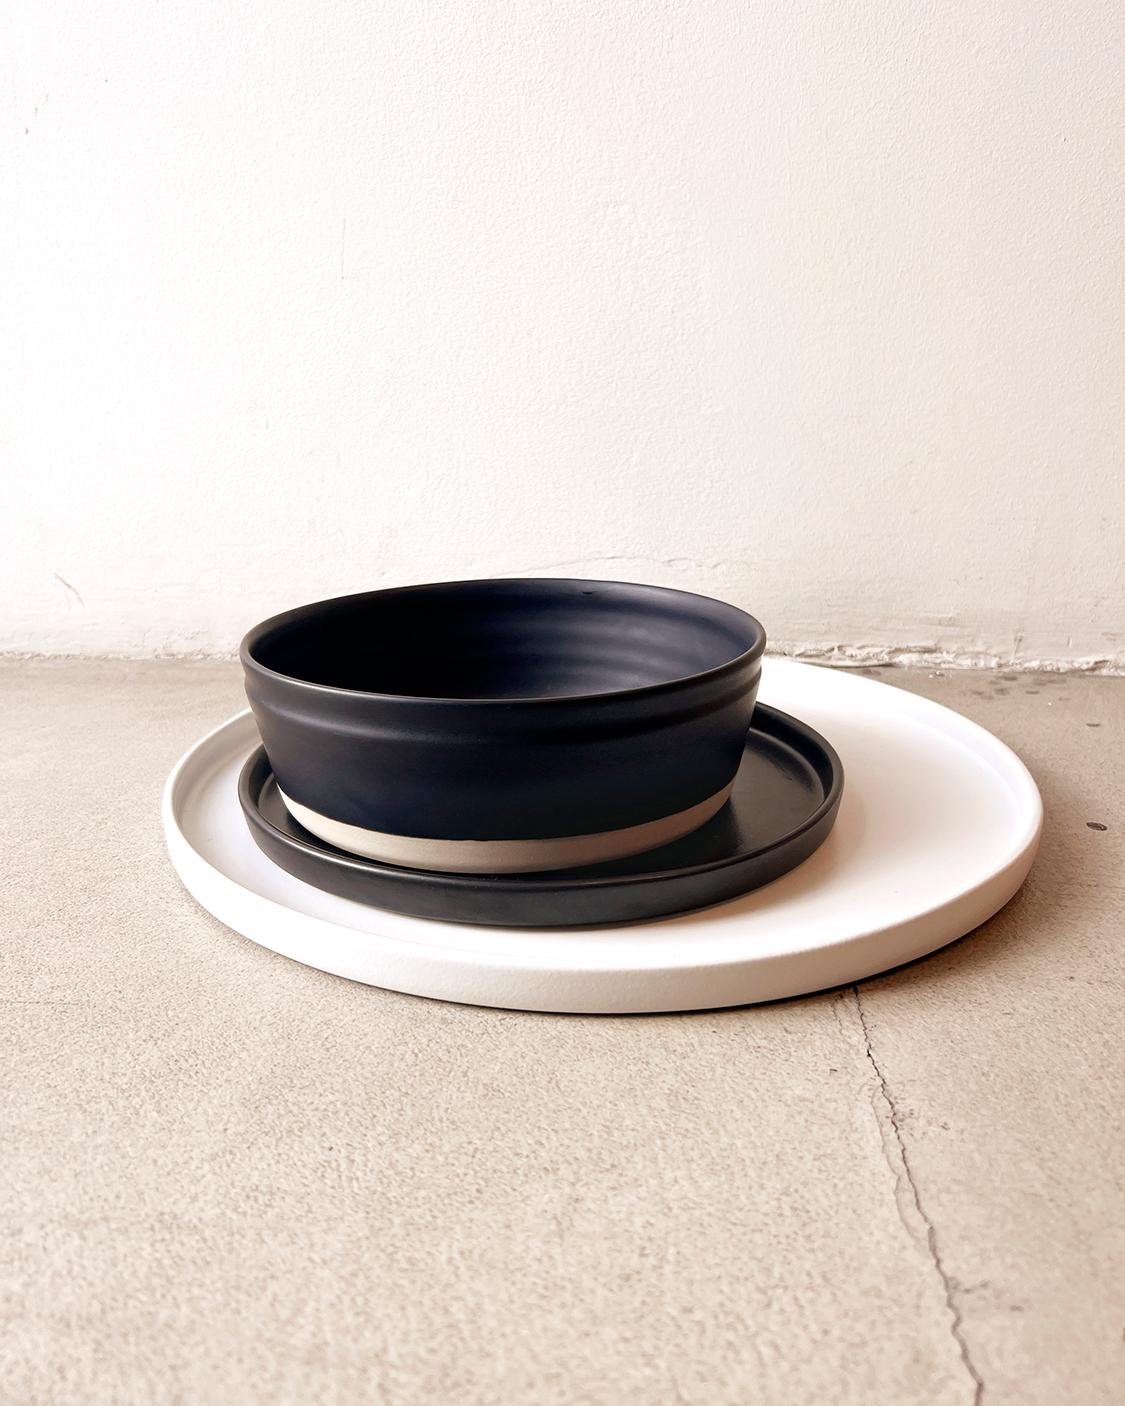 Elegant matte black stoneware bowls with a minimalist design

This tableware combines modern design with artisanal craftsmanship. Perfect for anyone who loves to throw a dinner party or just wants to match a black kitchen decor. These serving bowls